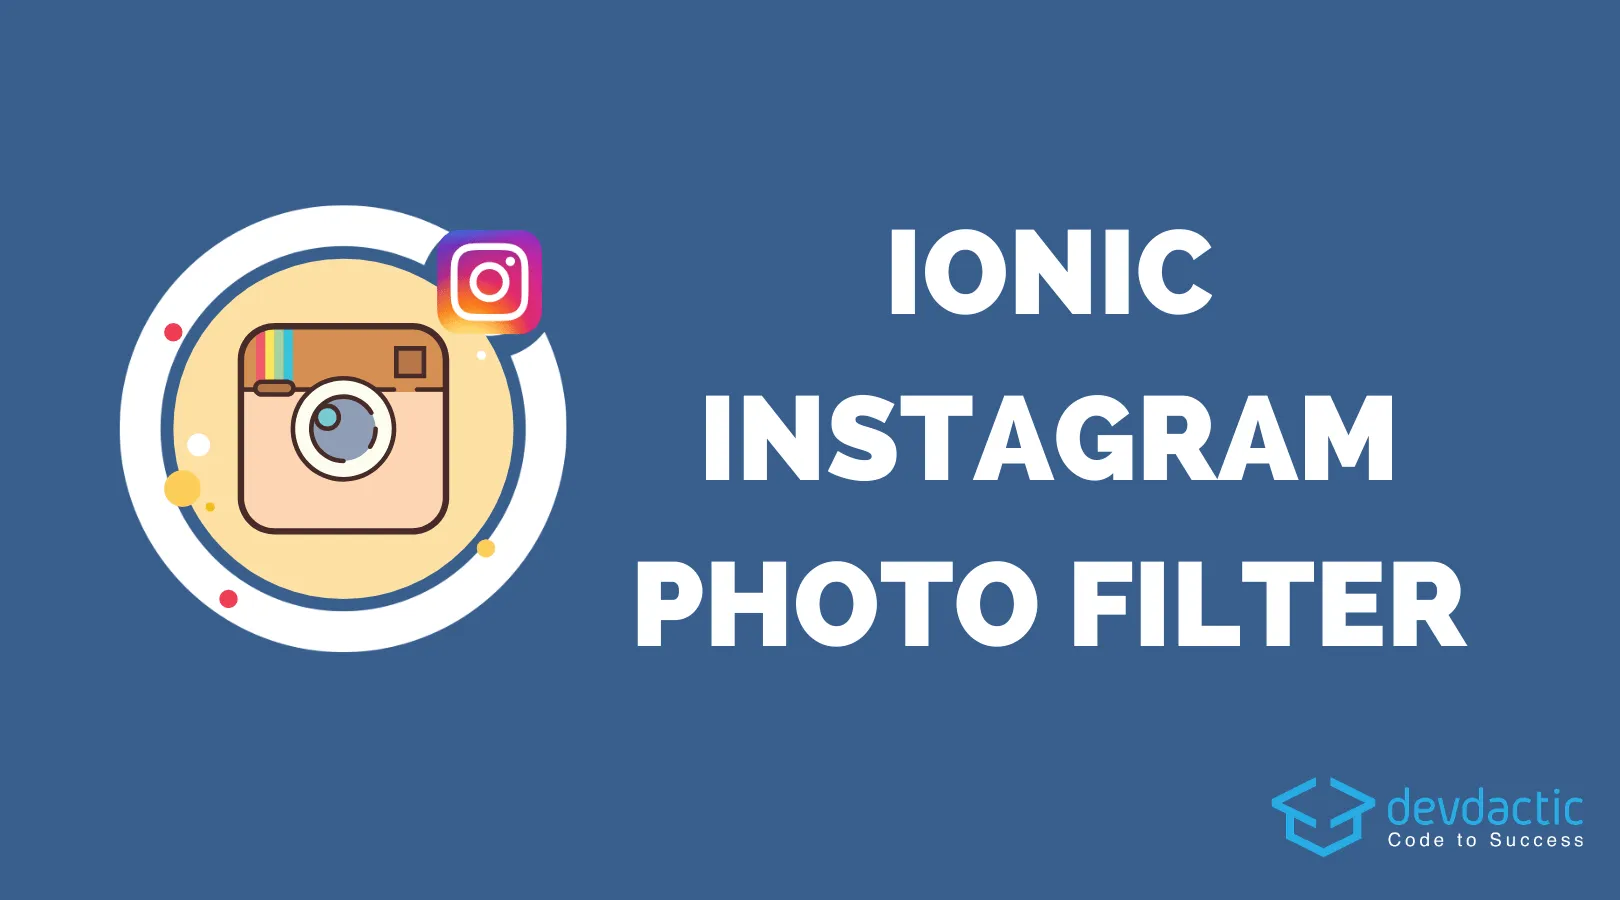 How to Apply Instagram like Photo Filters with Ionic & Capacitor